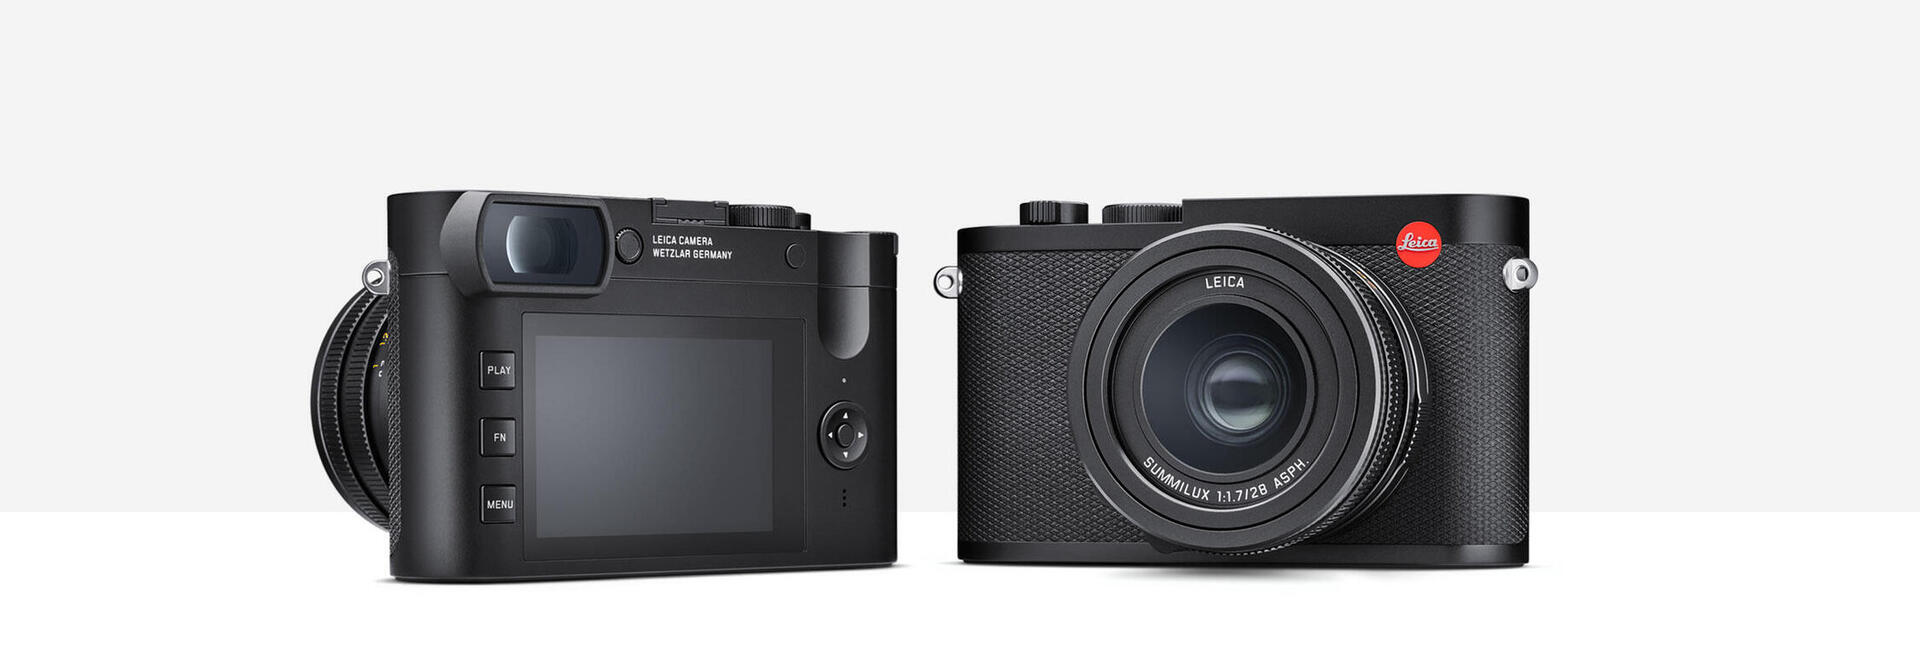 Leica-Q - Front / Back